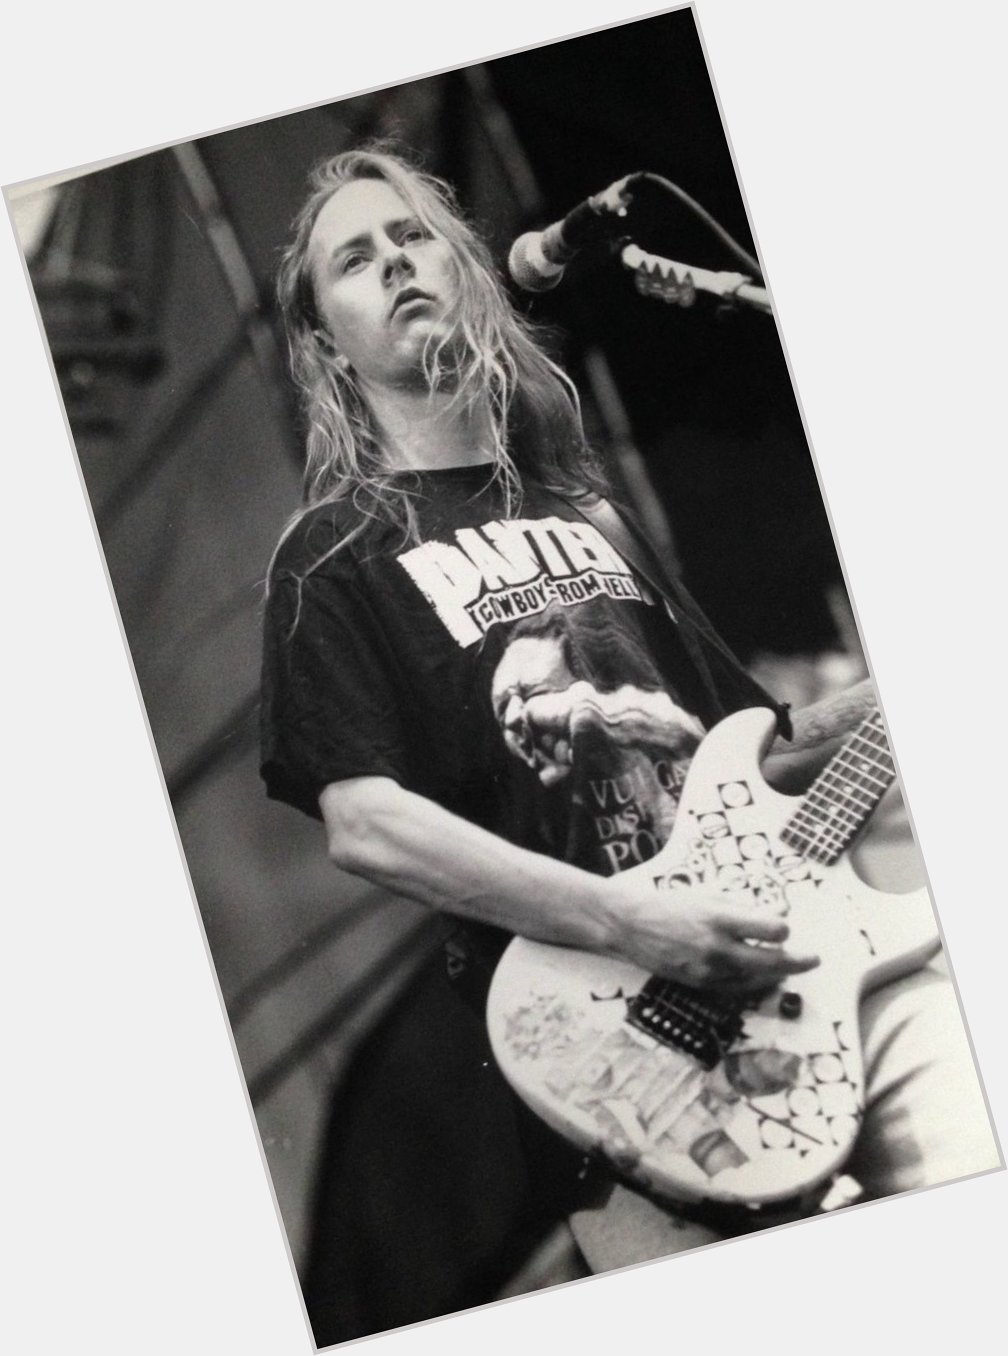 Big Happy Birthday to a huge influence in the rock n roll community, Jerry Cantrell! 